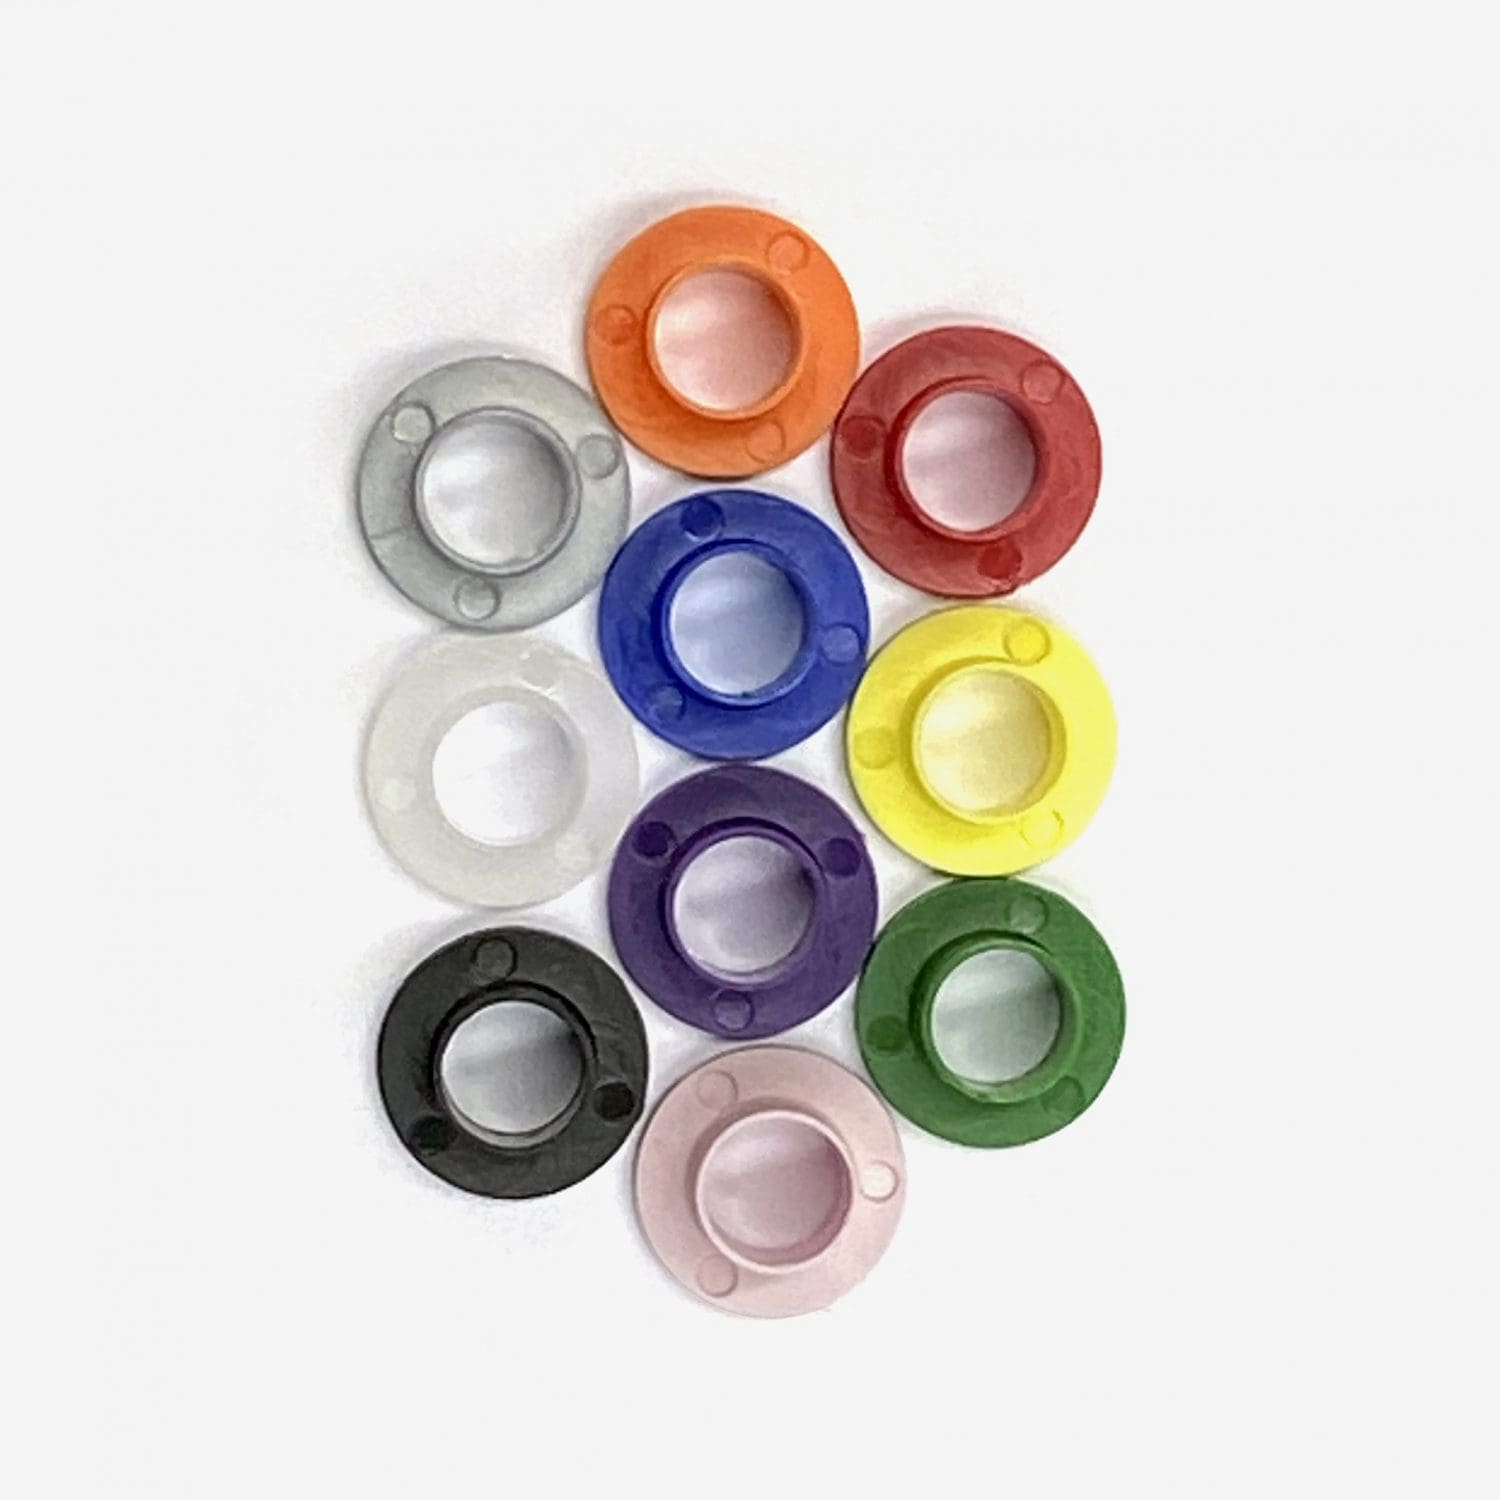 100-Pack Nylon Tension Rod Washers